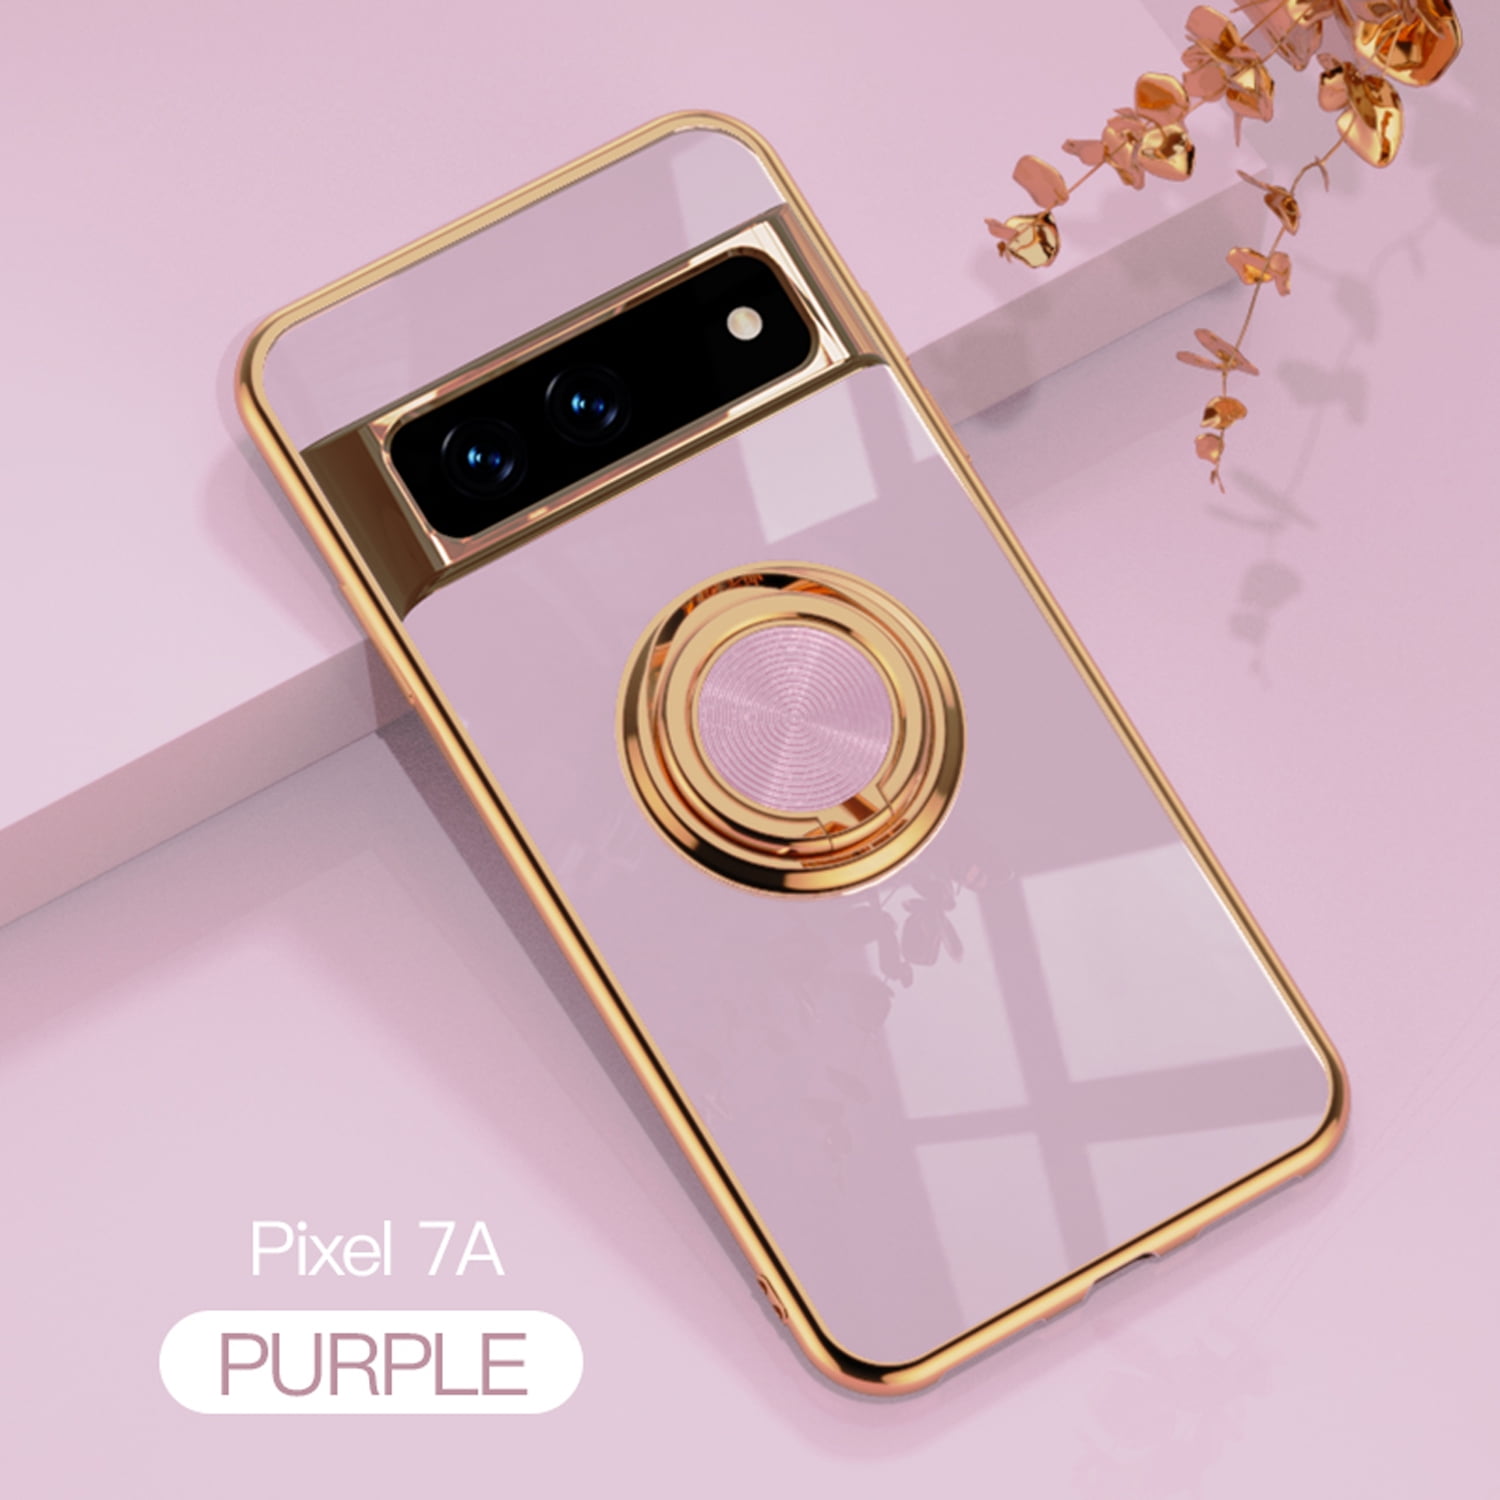 Aere Luxury Plated Silicone iPhone Case With Ring For Series 7, 8